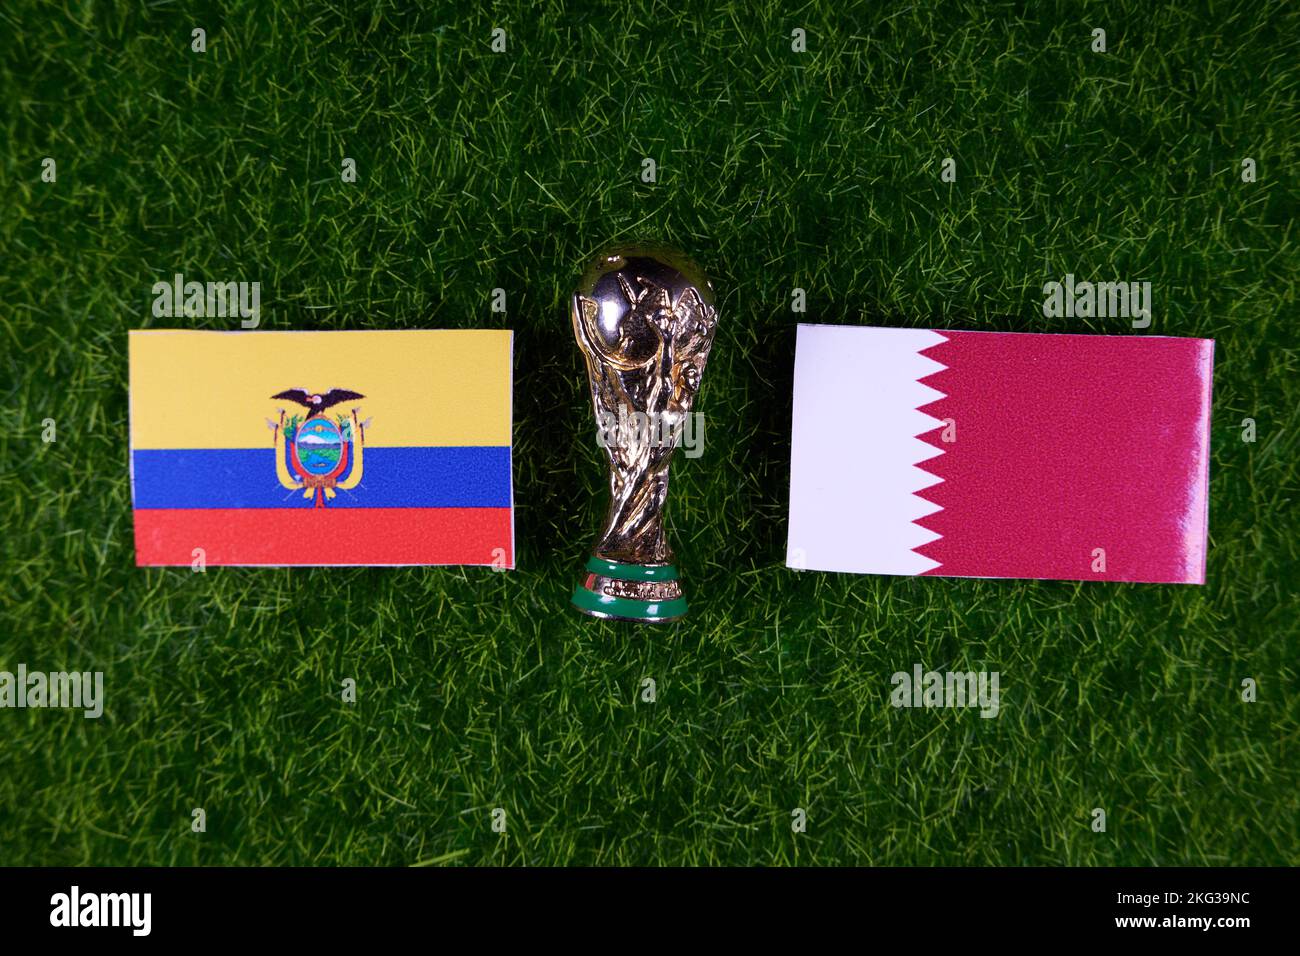 November 20, 2022, Doha, Qatar. Flags of Qatar and Ecuador and the FIFA World Cup trophy on the green lawn of the stadium. Stock Photo